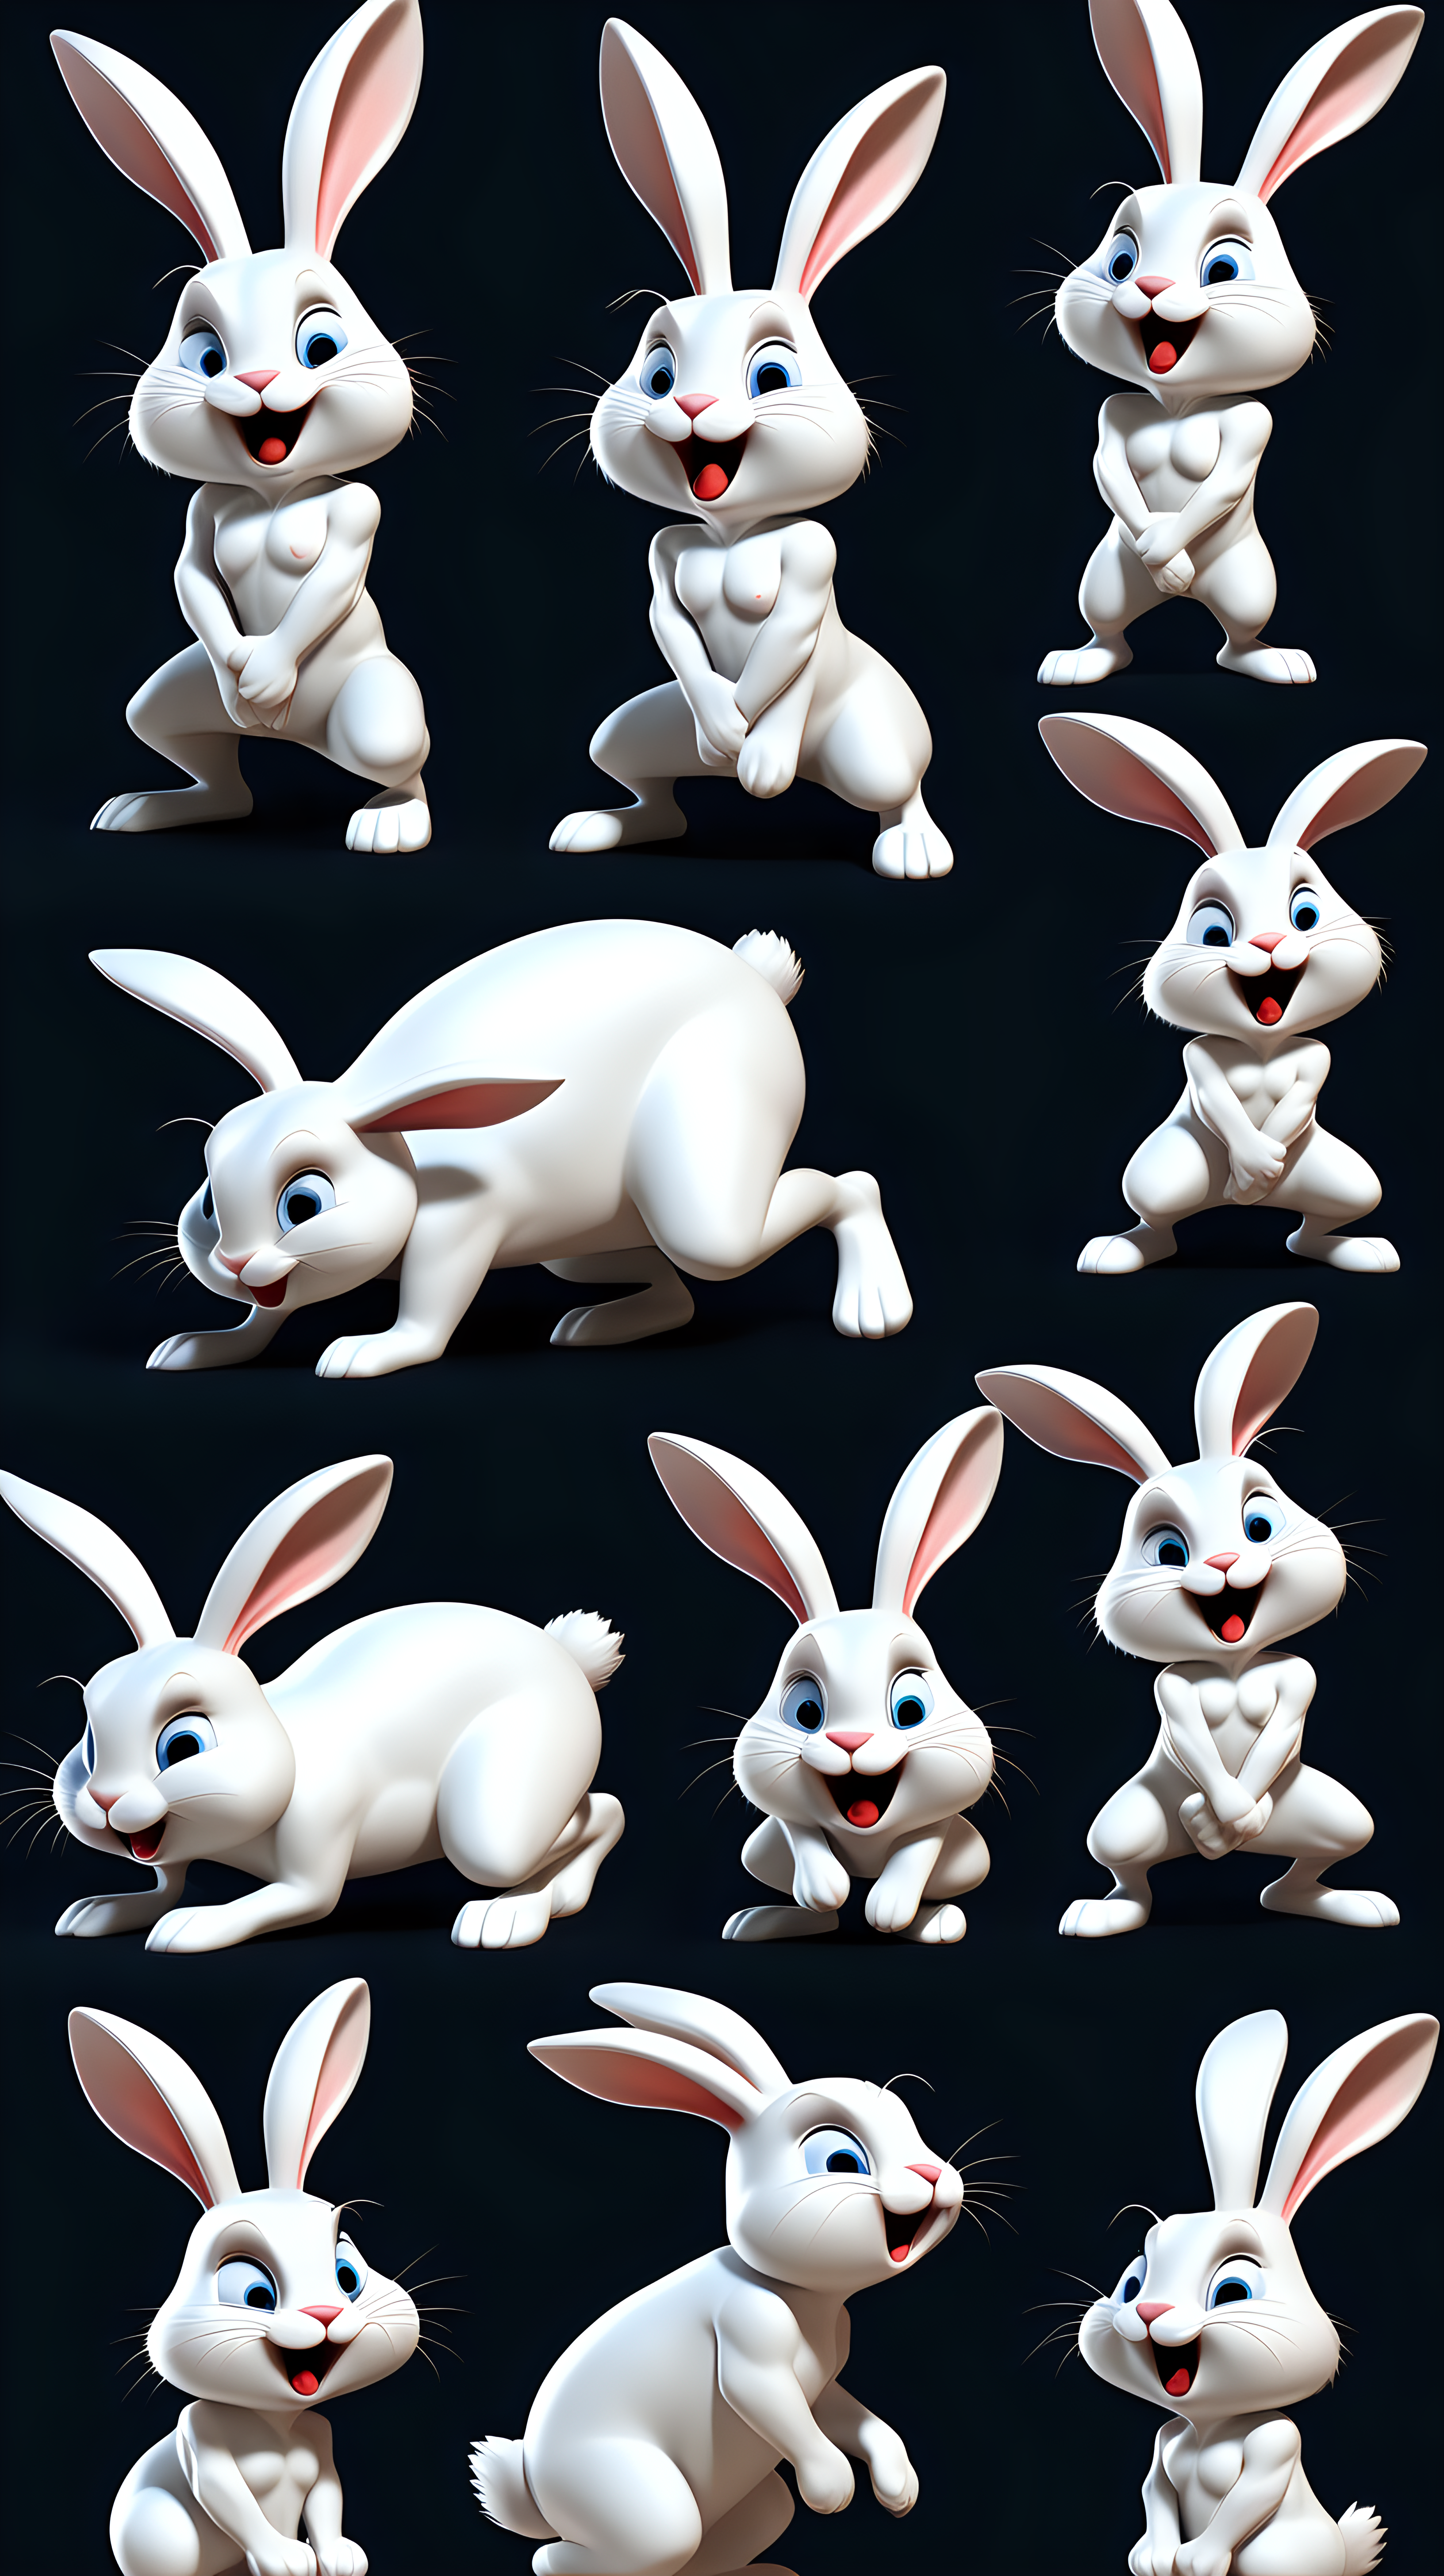 white bunny, different body postures and expressions